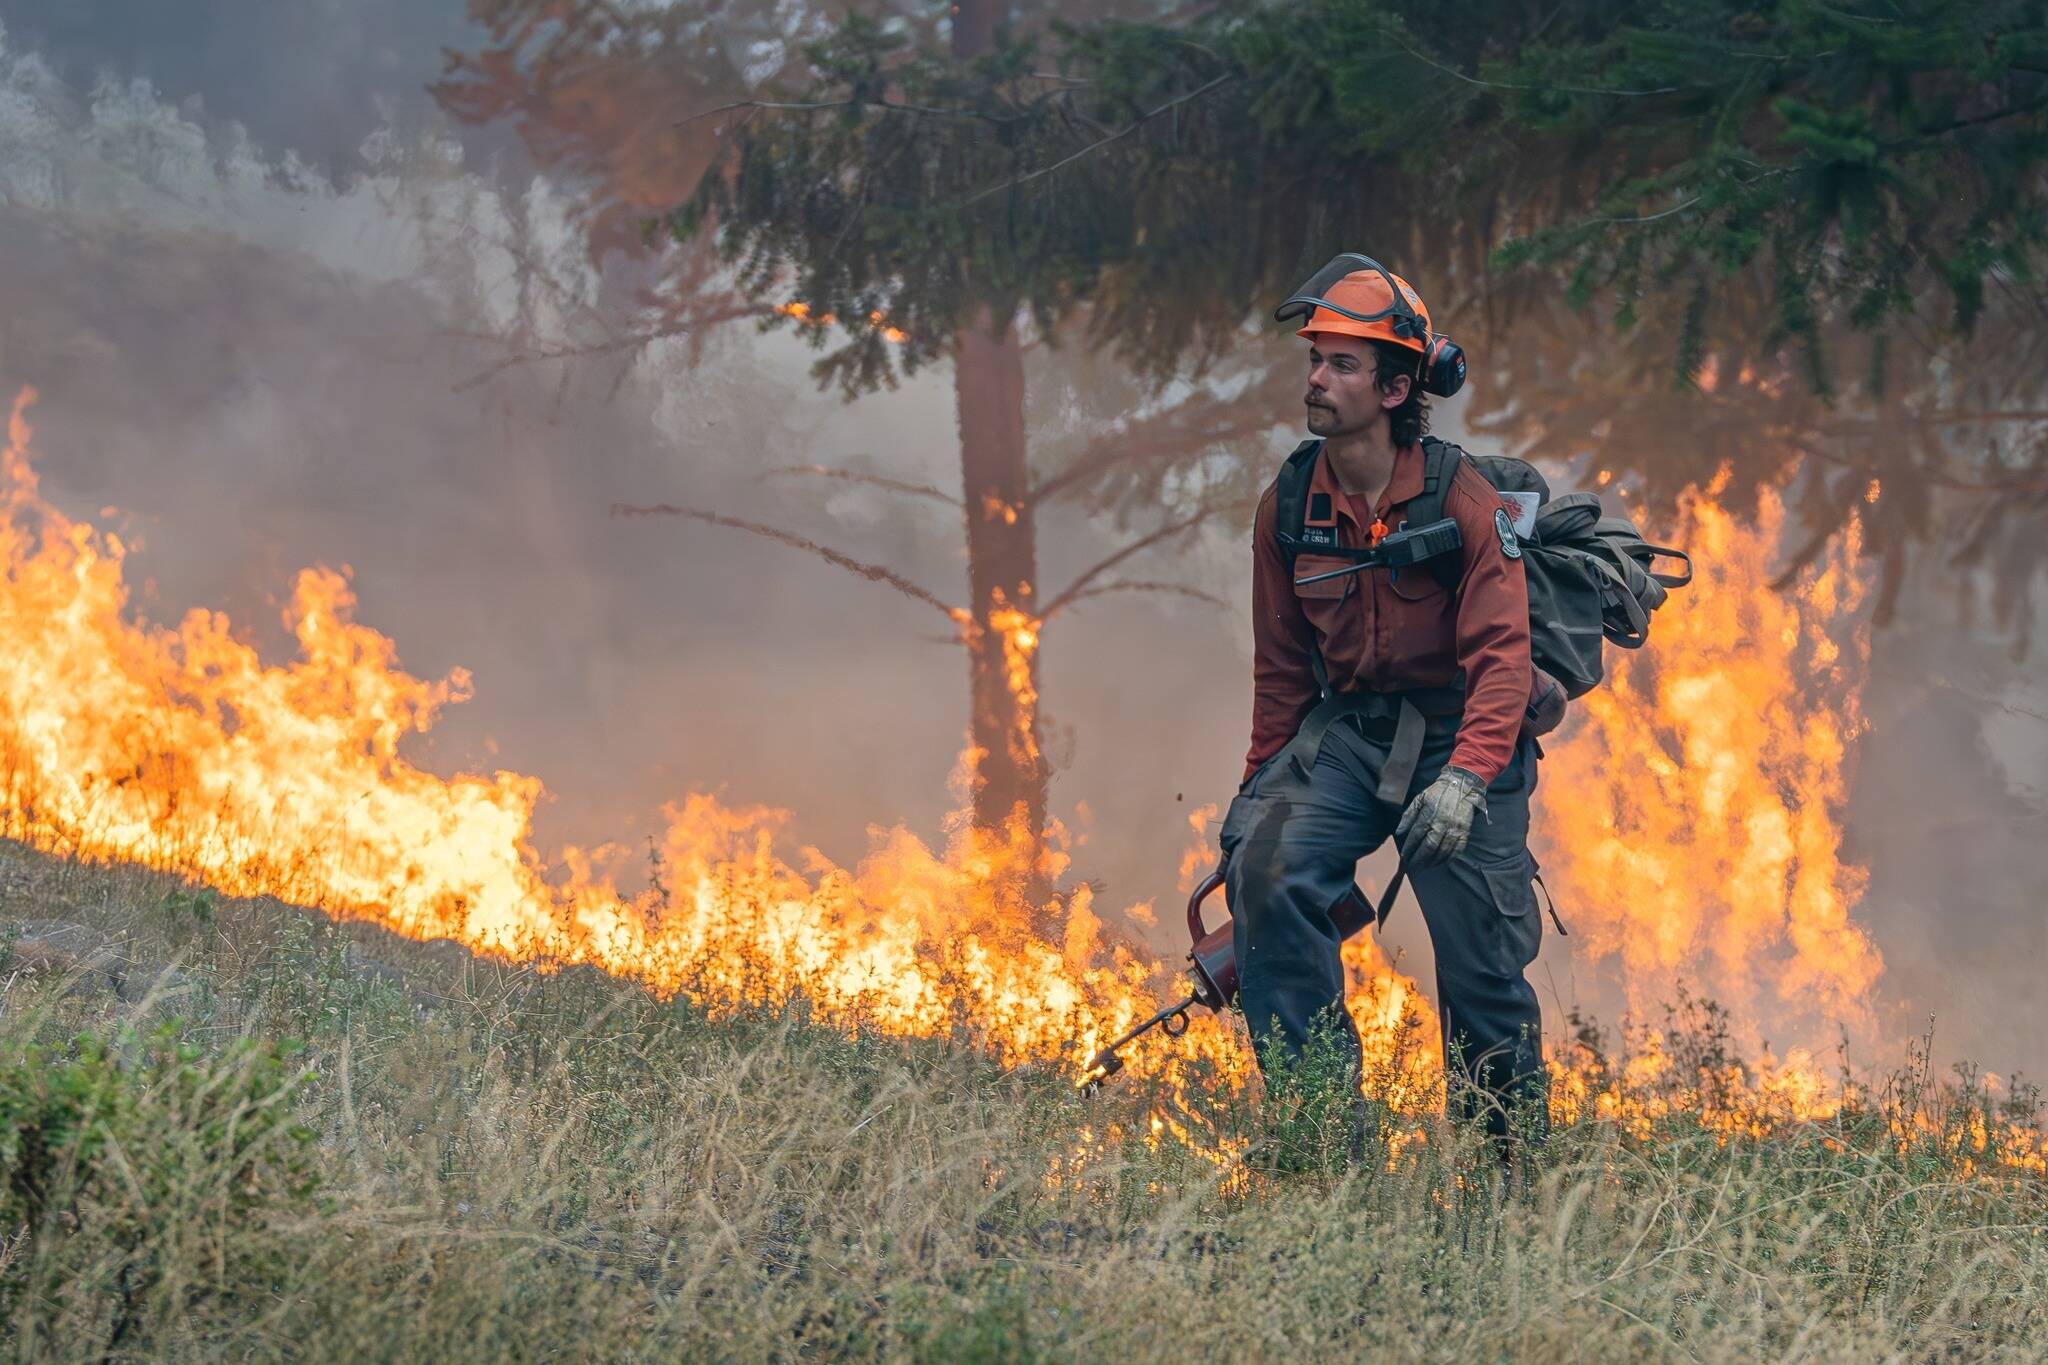 A BC Wildfire Service firefighter working on the McDougall Creek Fire in West Kelowna. (BCWS photo)